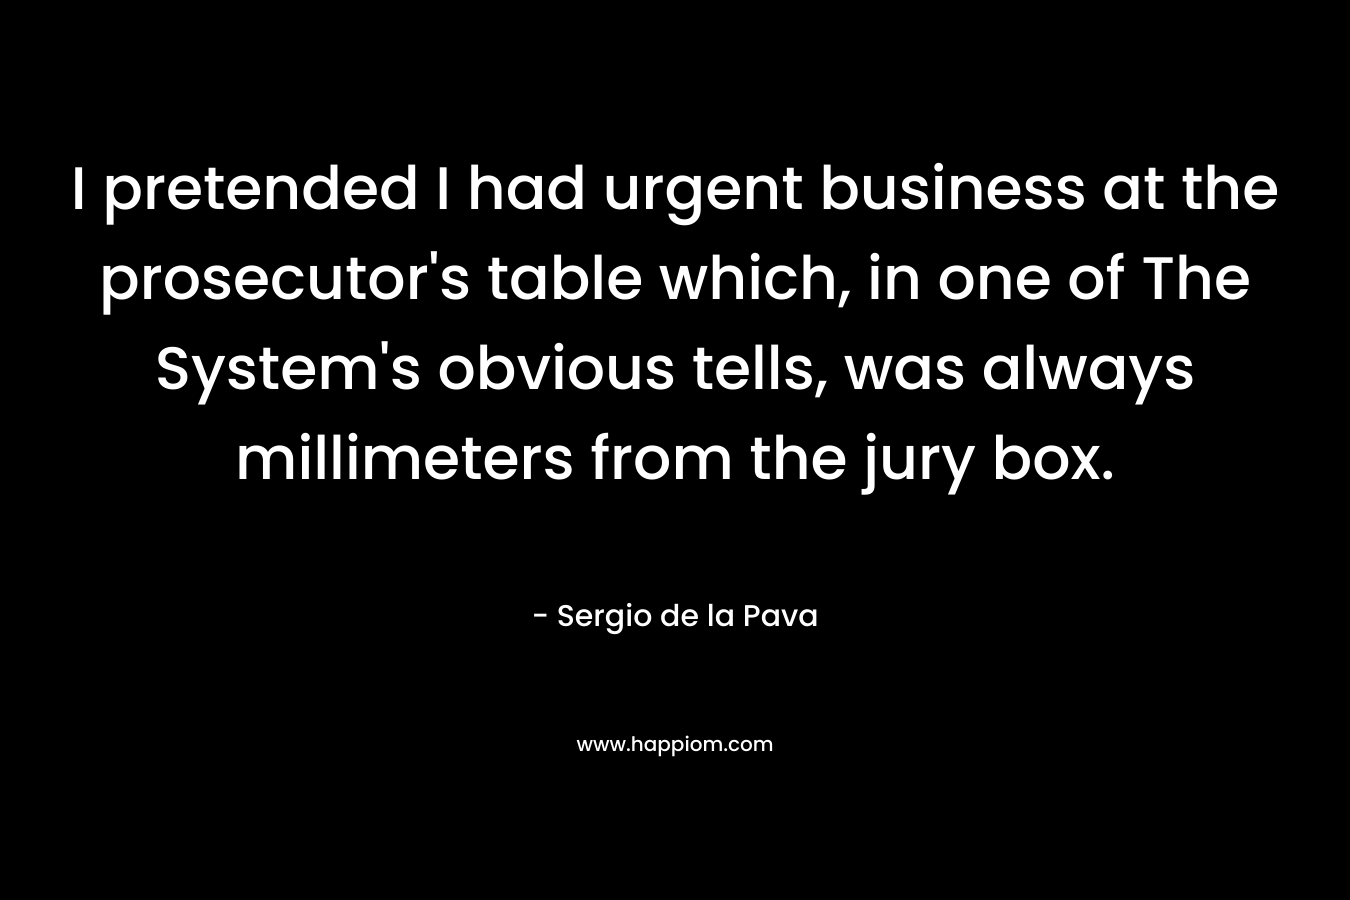 I pretended I had urgent business at the prosecutor’s table which, in one of The System’s obvious tells, was always millimeters from the jury box. – Sergio de la Pava